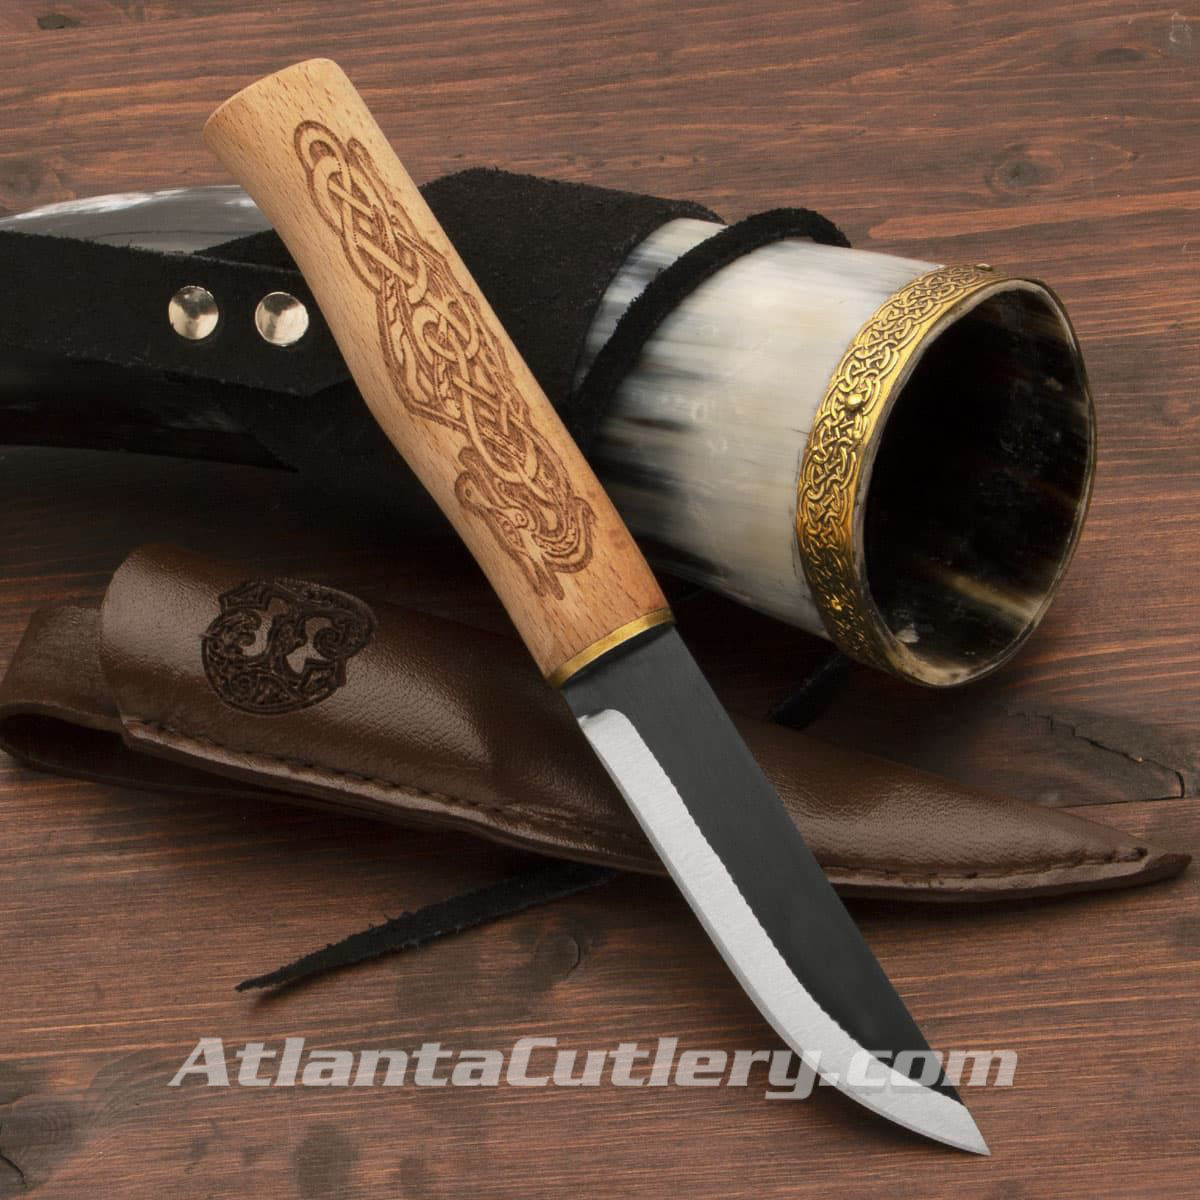 Midgard EDC Viking Knife with sharp high carbon steel blade, laser-etched wood grip and embossed leather belt sheath